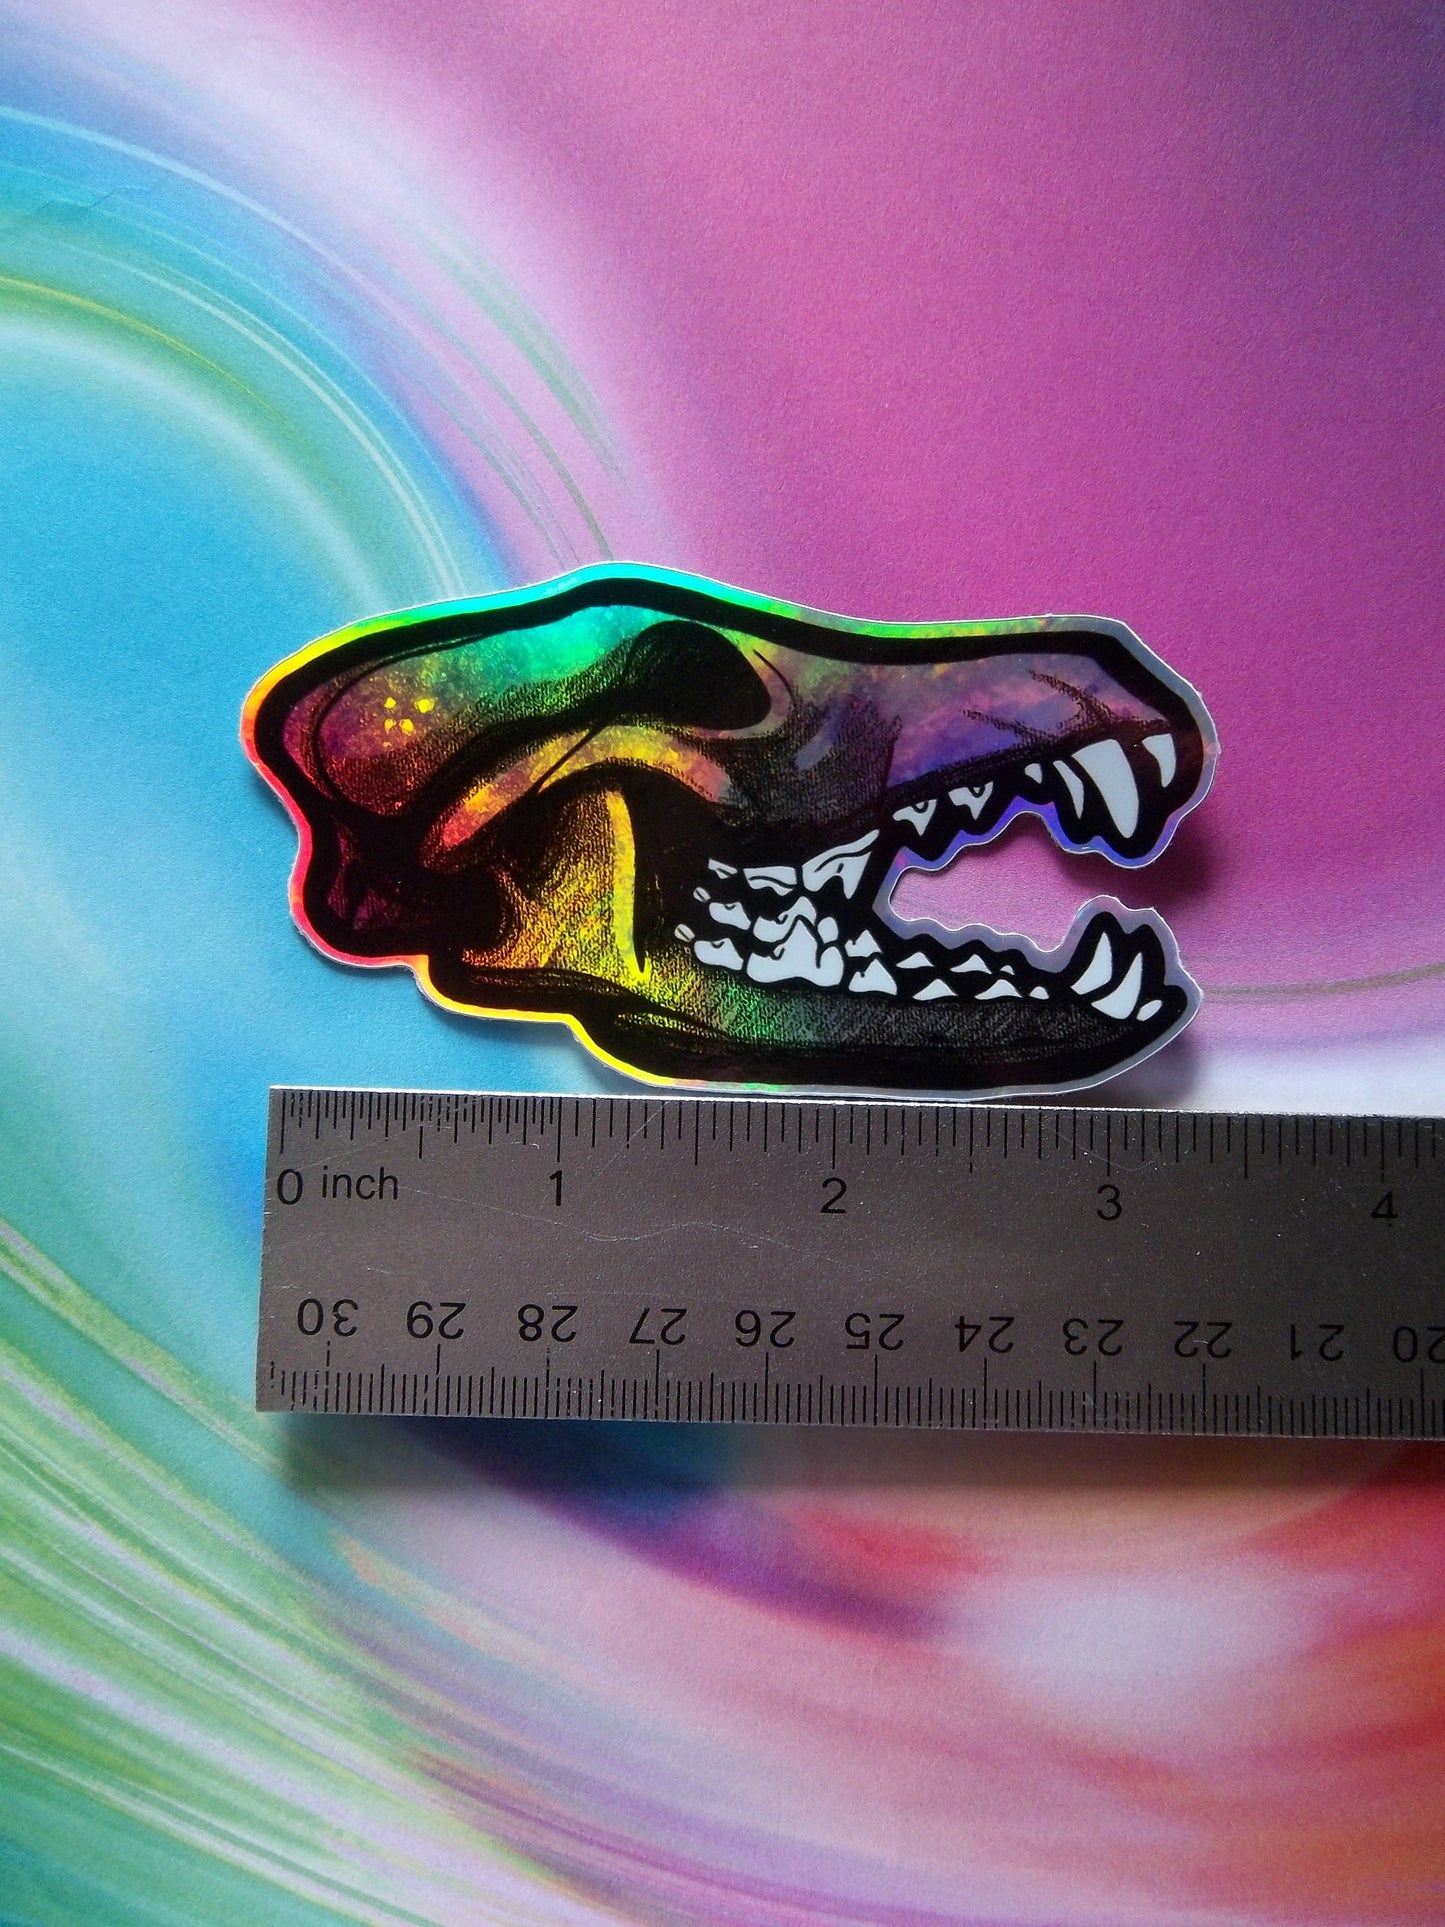 Wolf / Coyote / Canine Skull Sticker - 3" Holo Vinyl - Vulture Culture